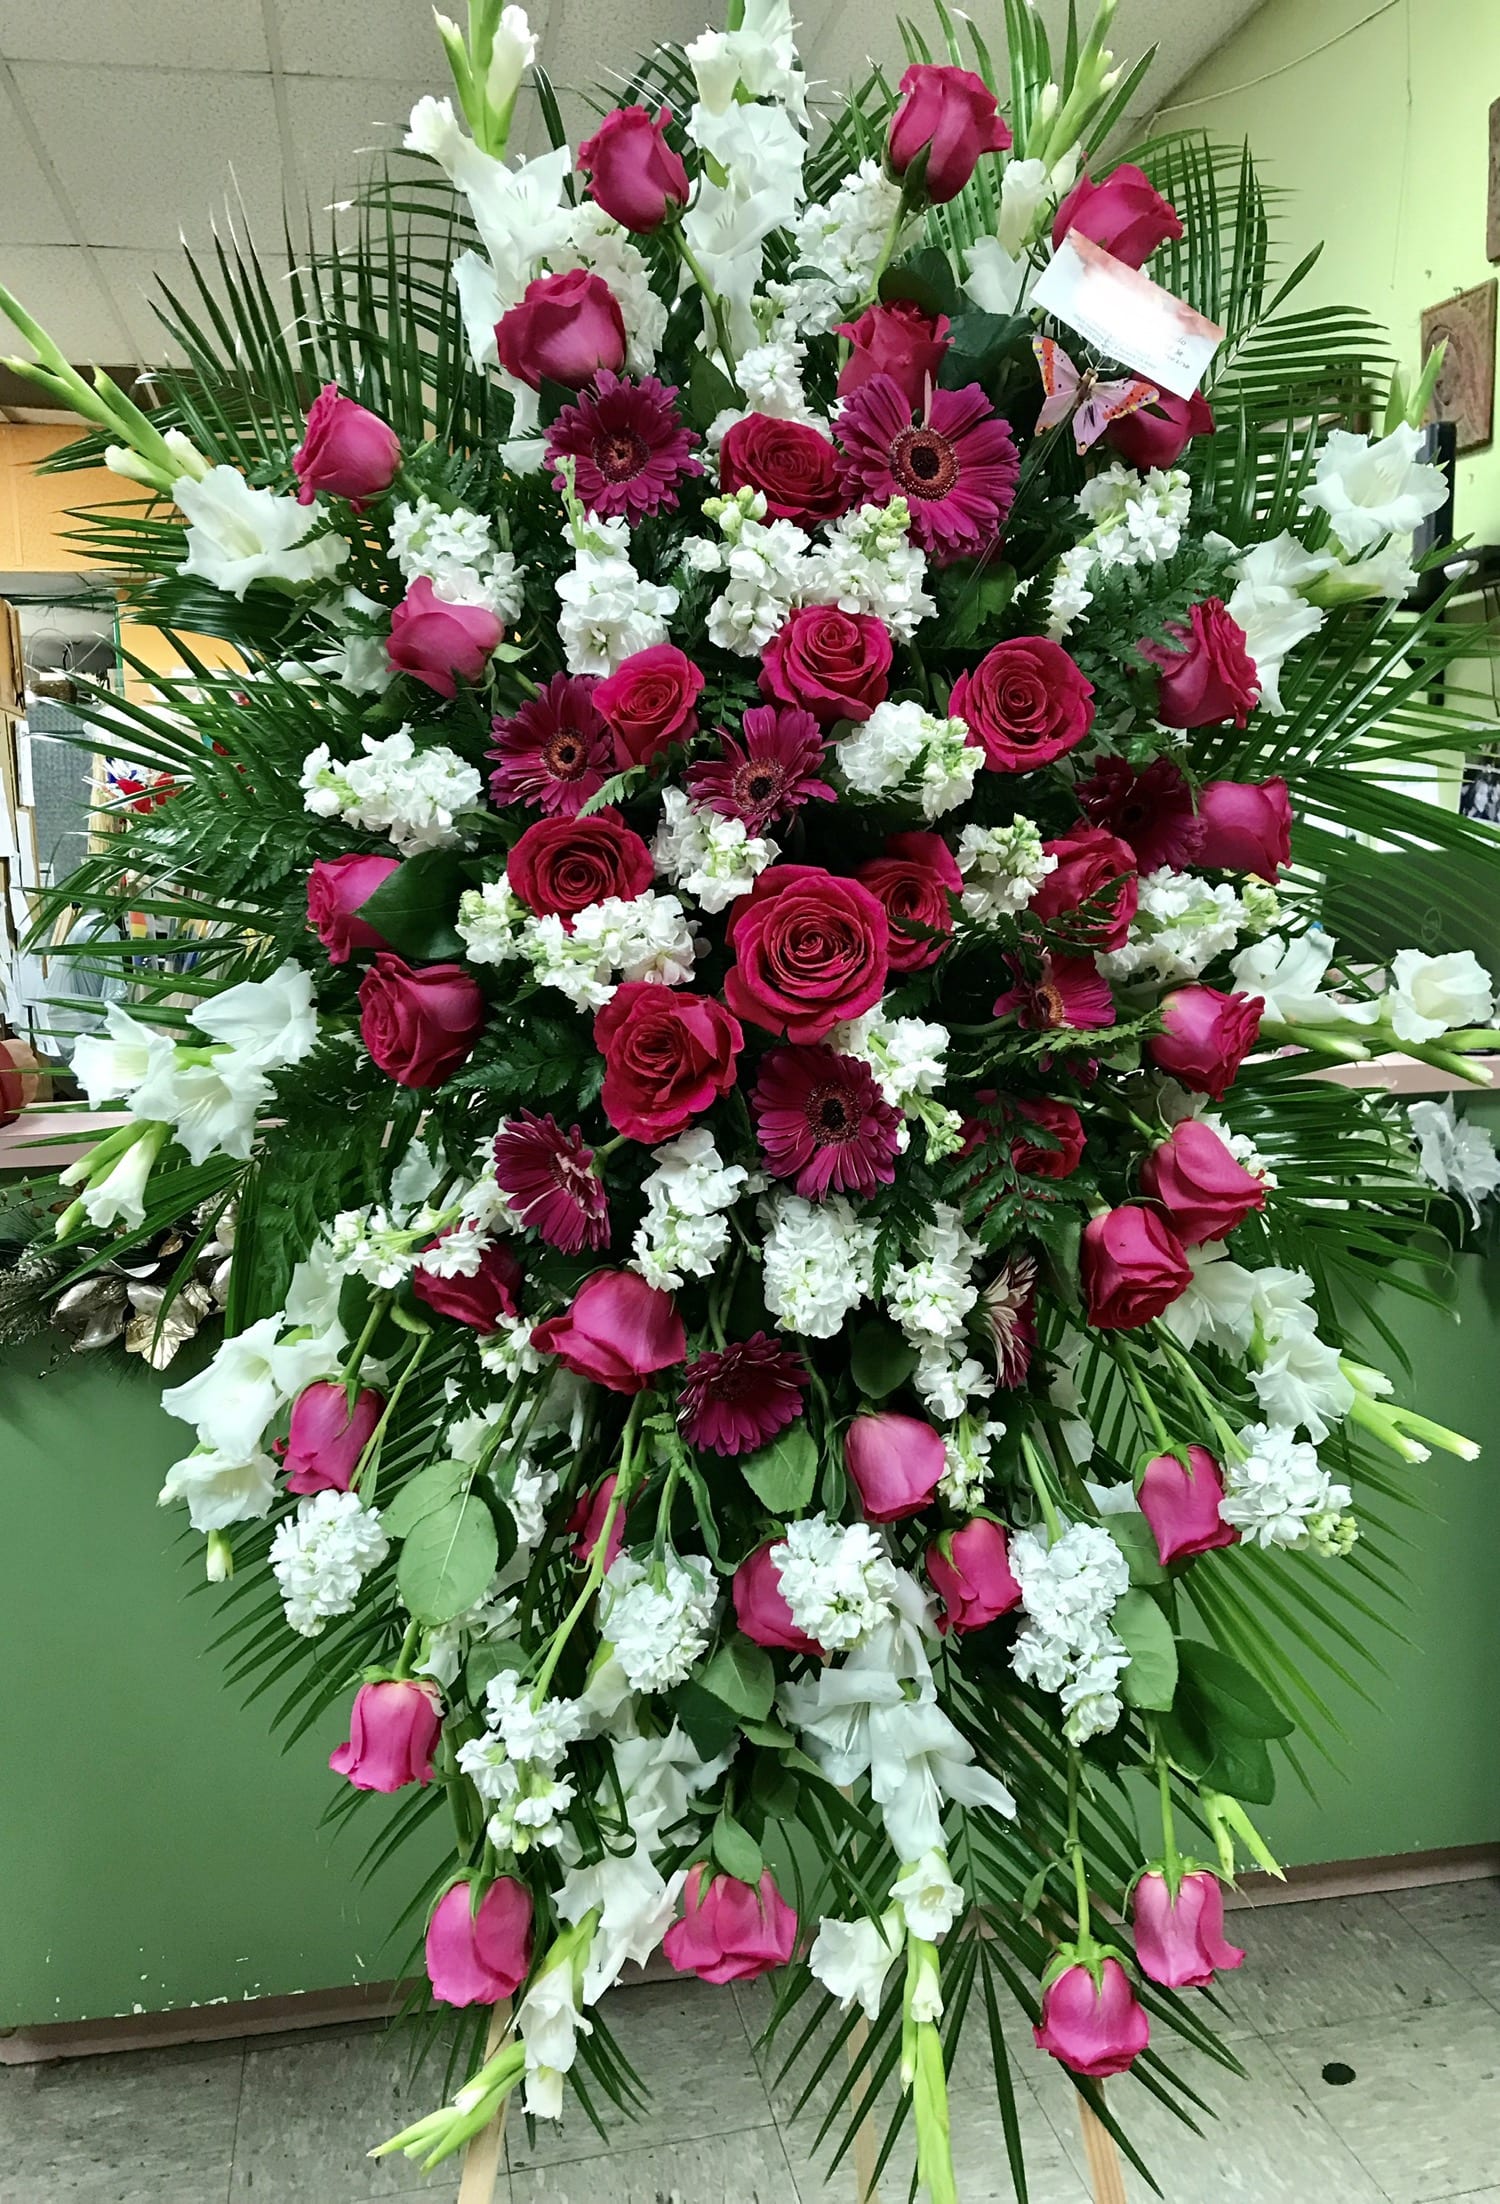 Funeral Flowers delivery by Florist of Riverside - a Riverside CA